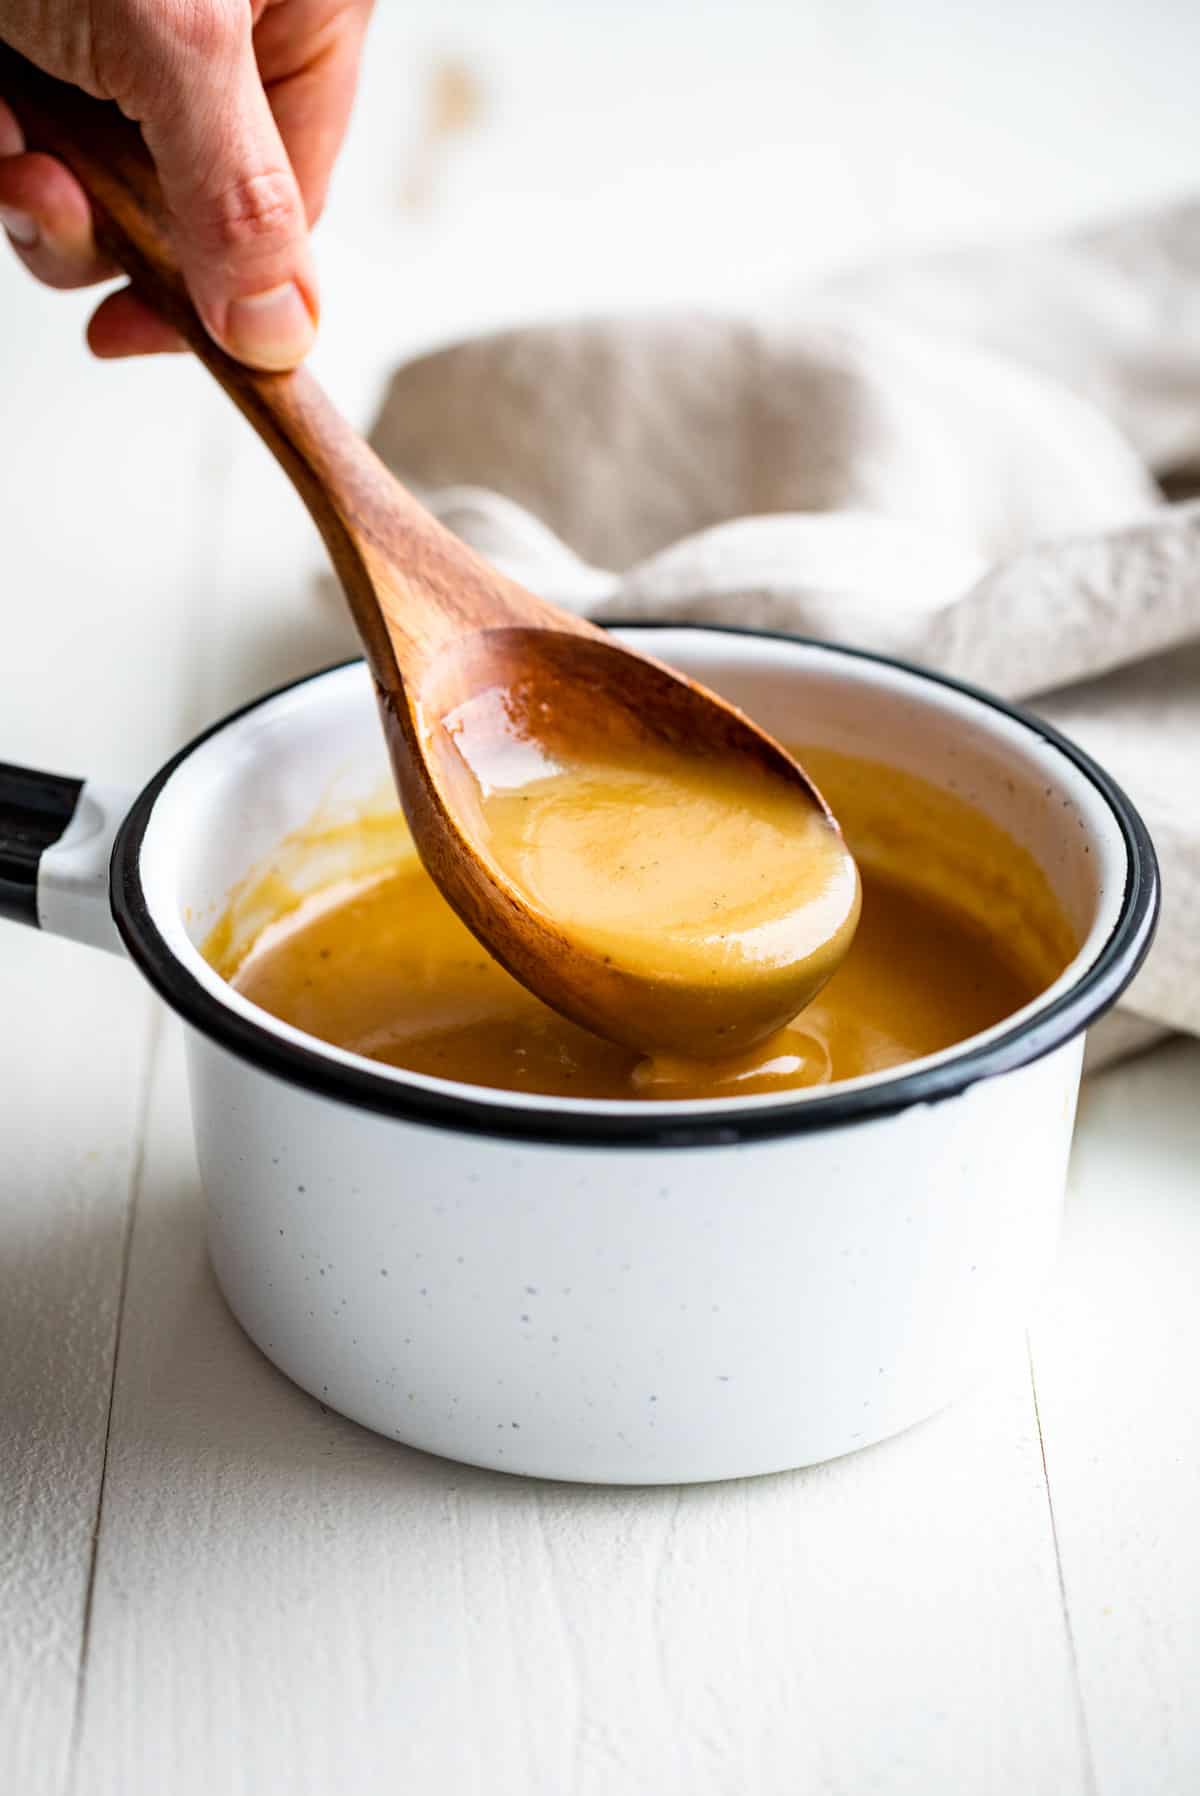 A hand holding a wooden spoon lifting out some finished gravy from a white pot.